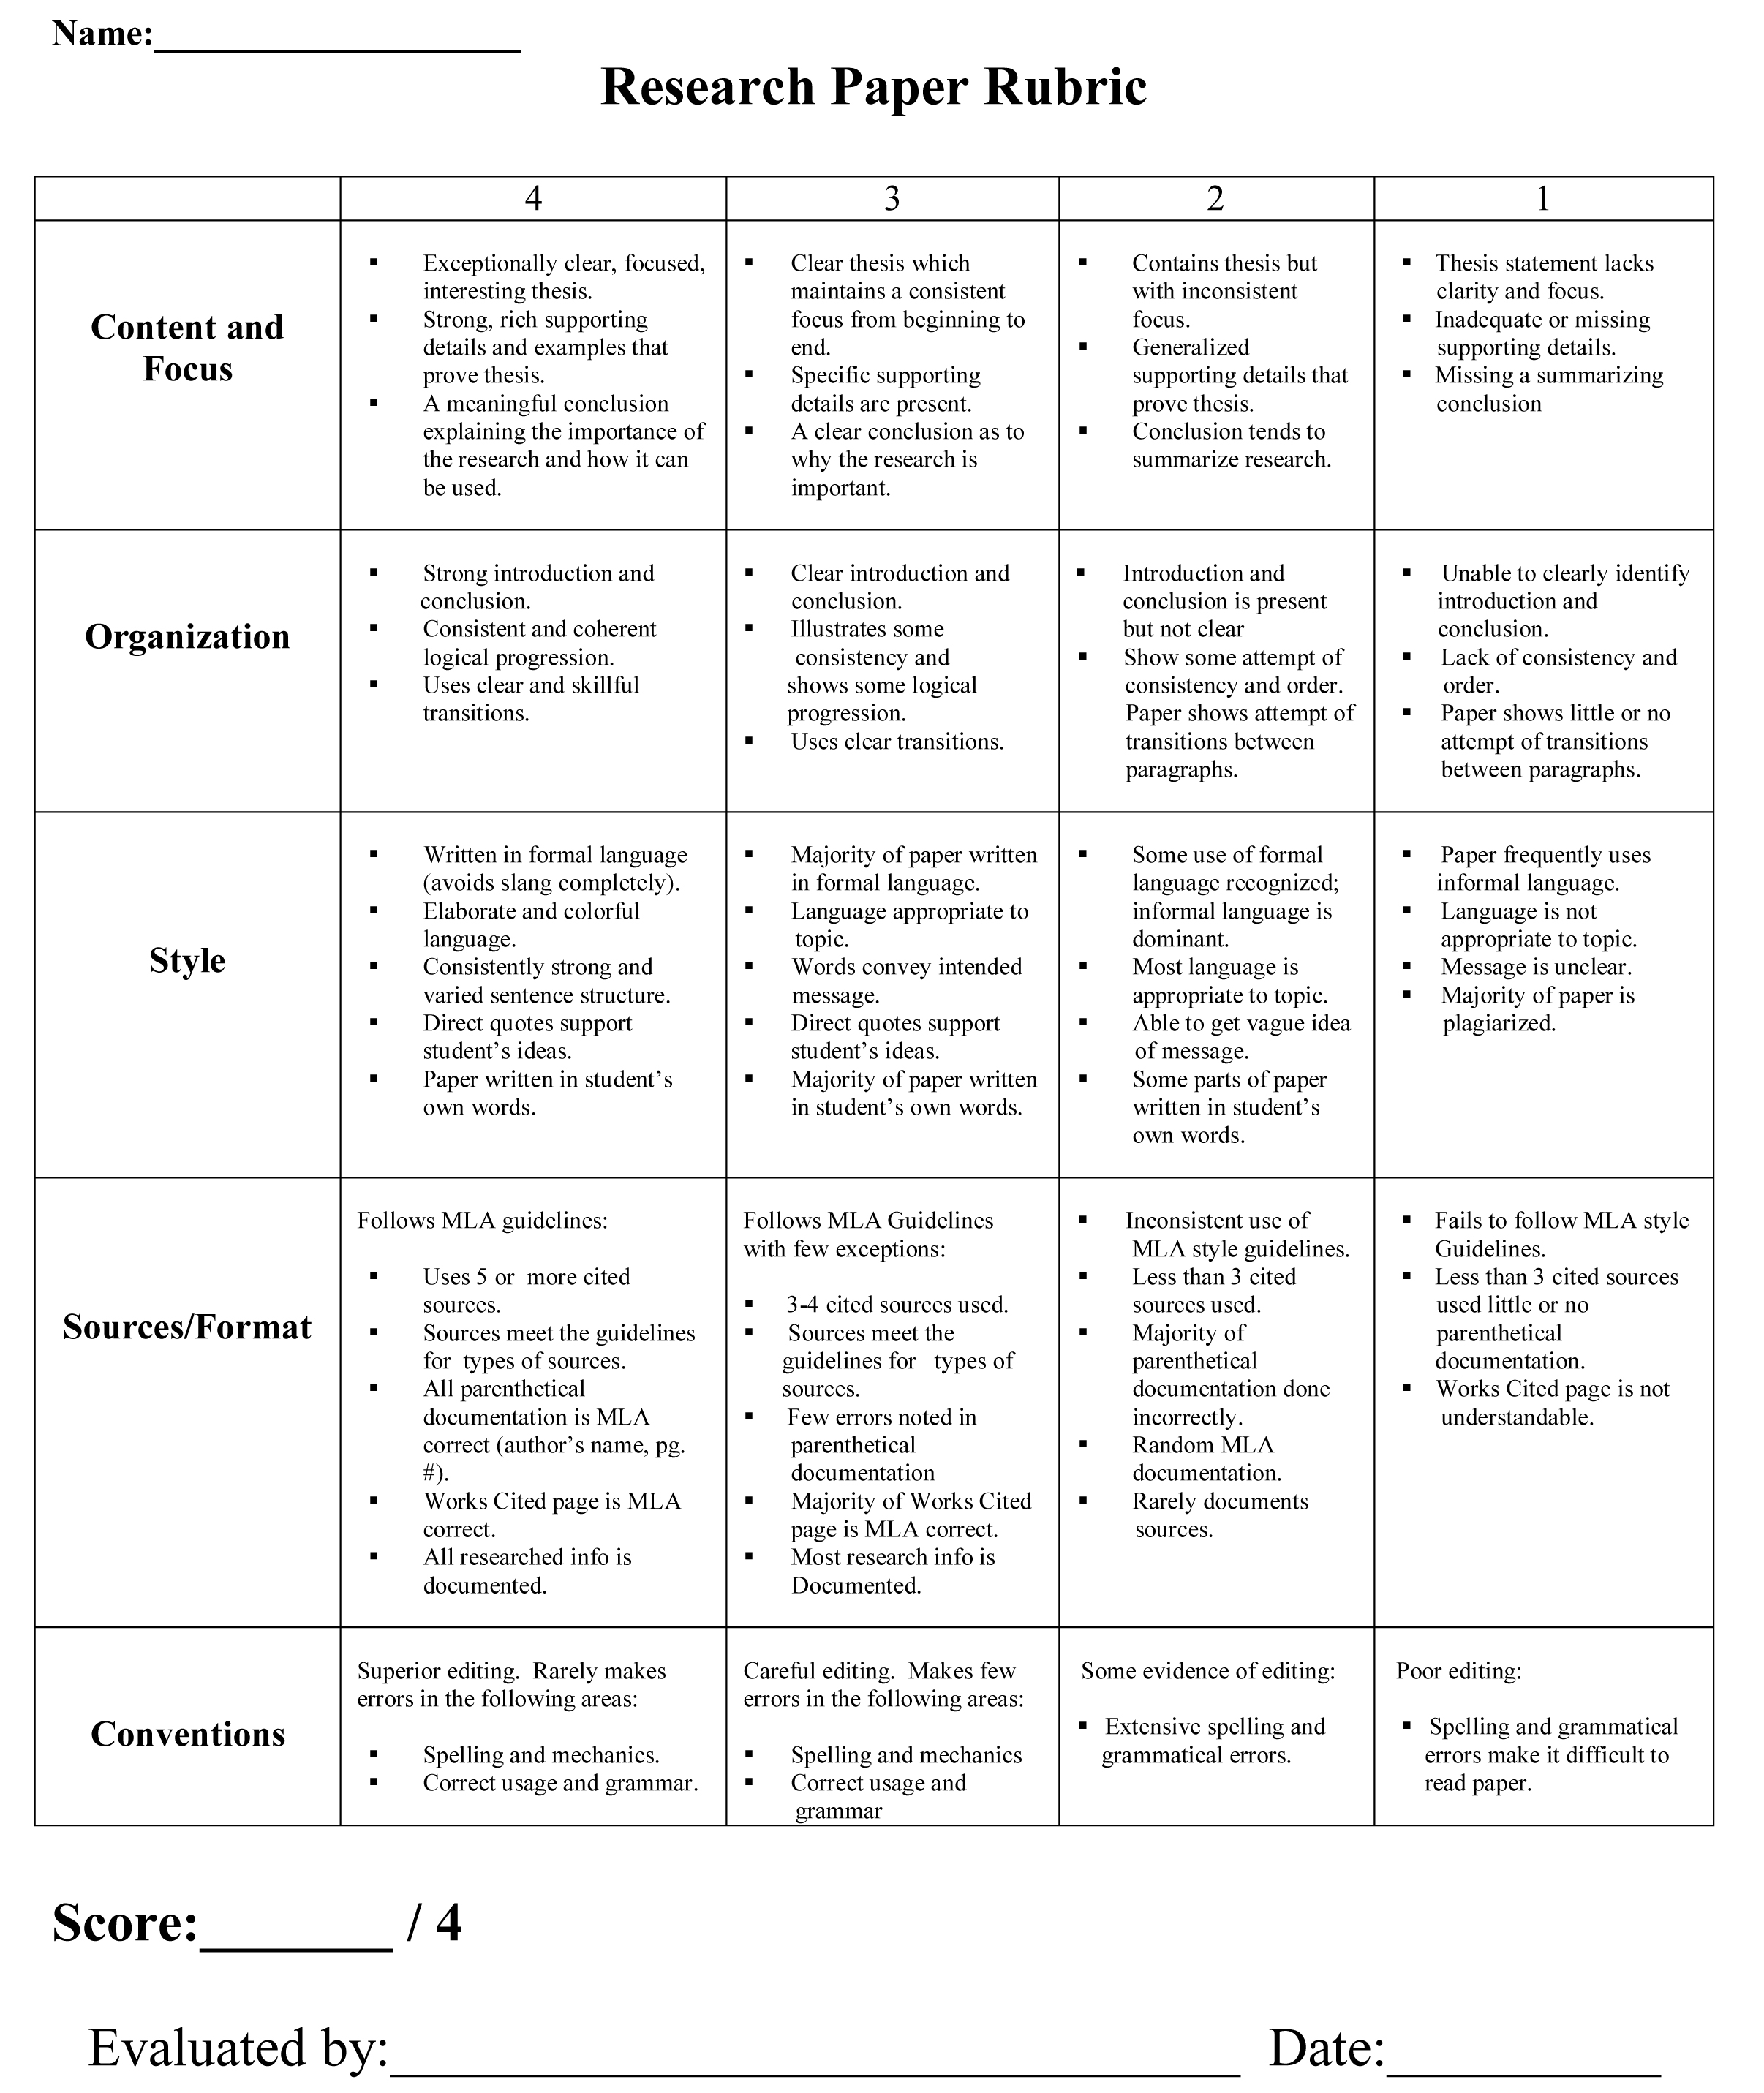 Example 1 - Research Paper Rubric